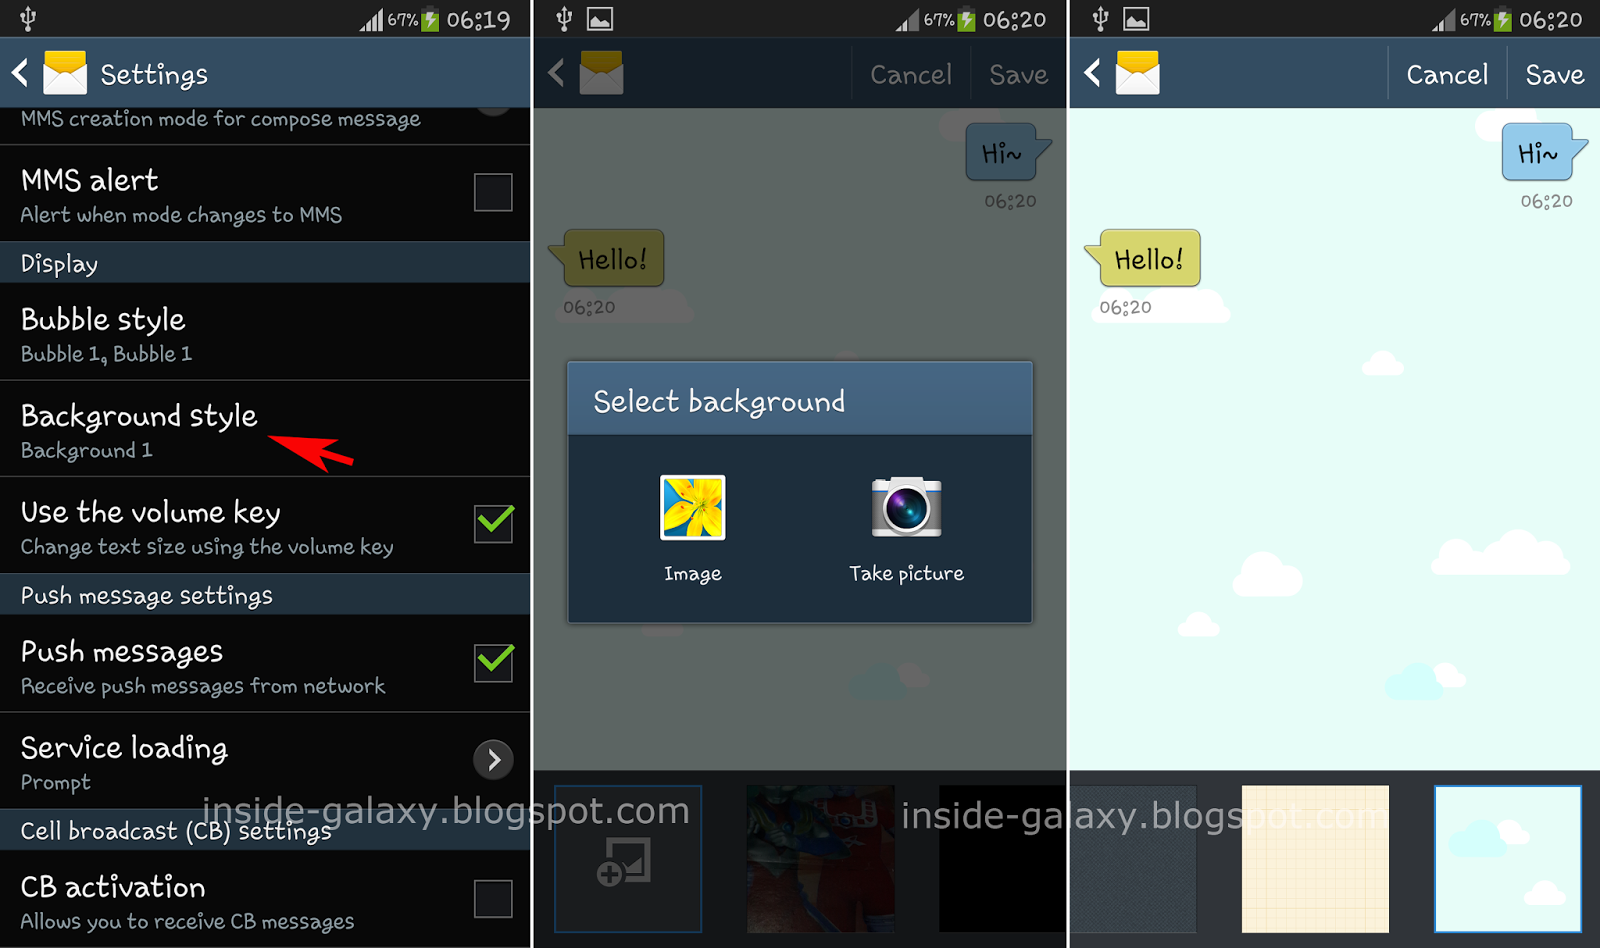 Galaxy S4 How To Change Bubble And Background Style In Messaging App